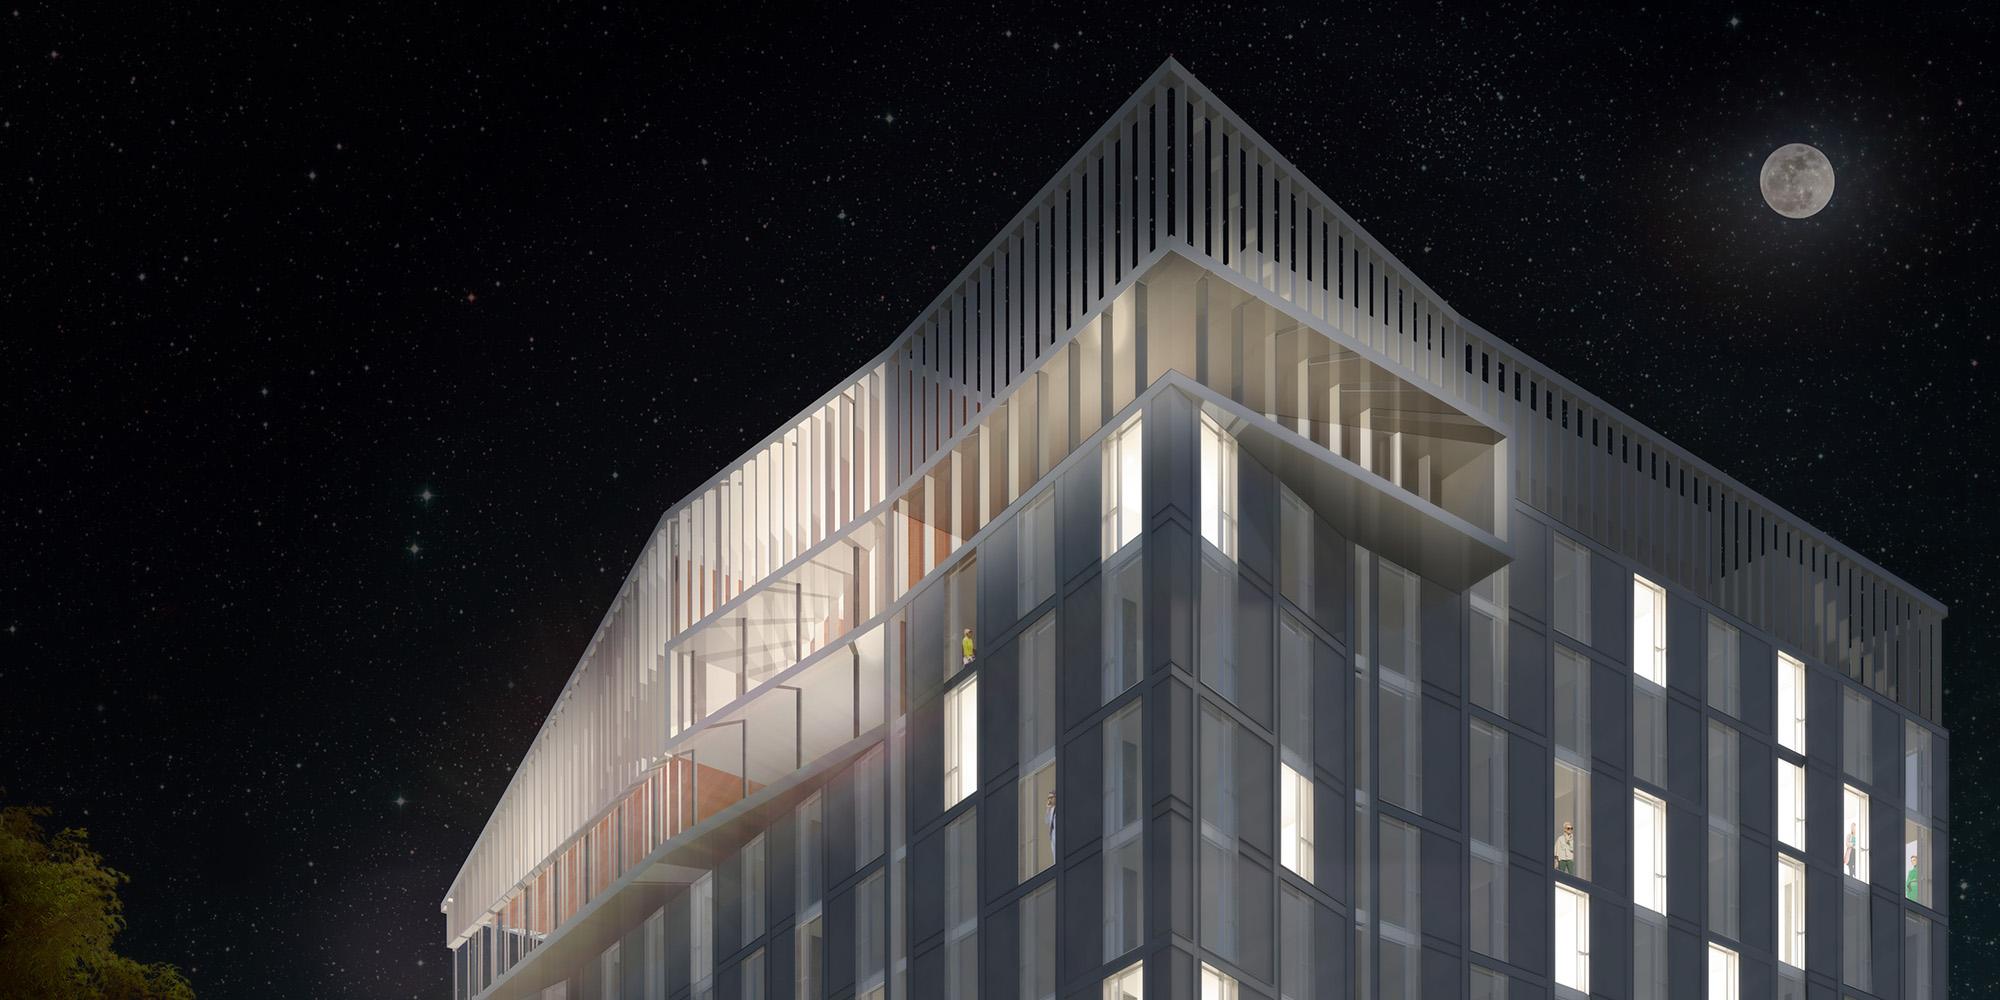 The San Francisco Conservatory of Music (SFCM) announces the expansion of its campus and the construction of the Ute and William K. Bowes, Jr. Center for Performing Arts (The Bowes Center) in San Francisco’s Civic Center. 